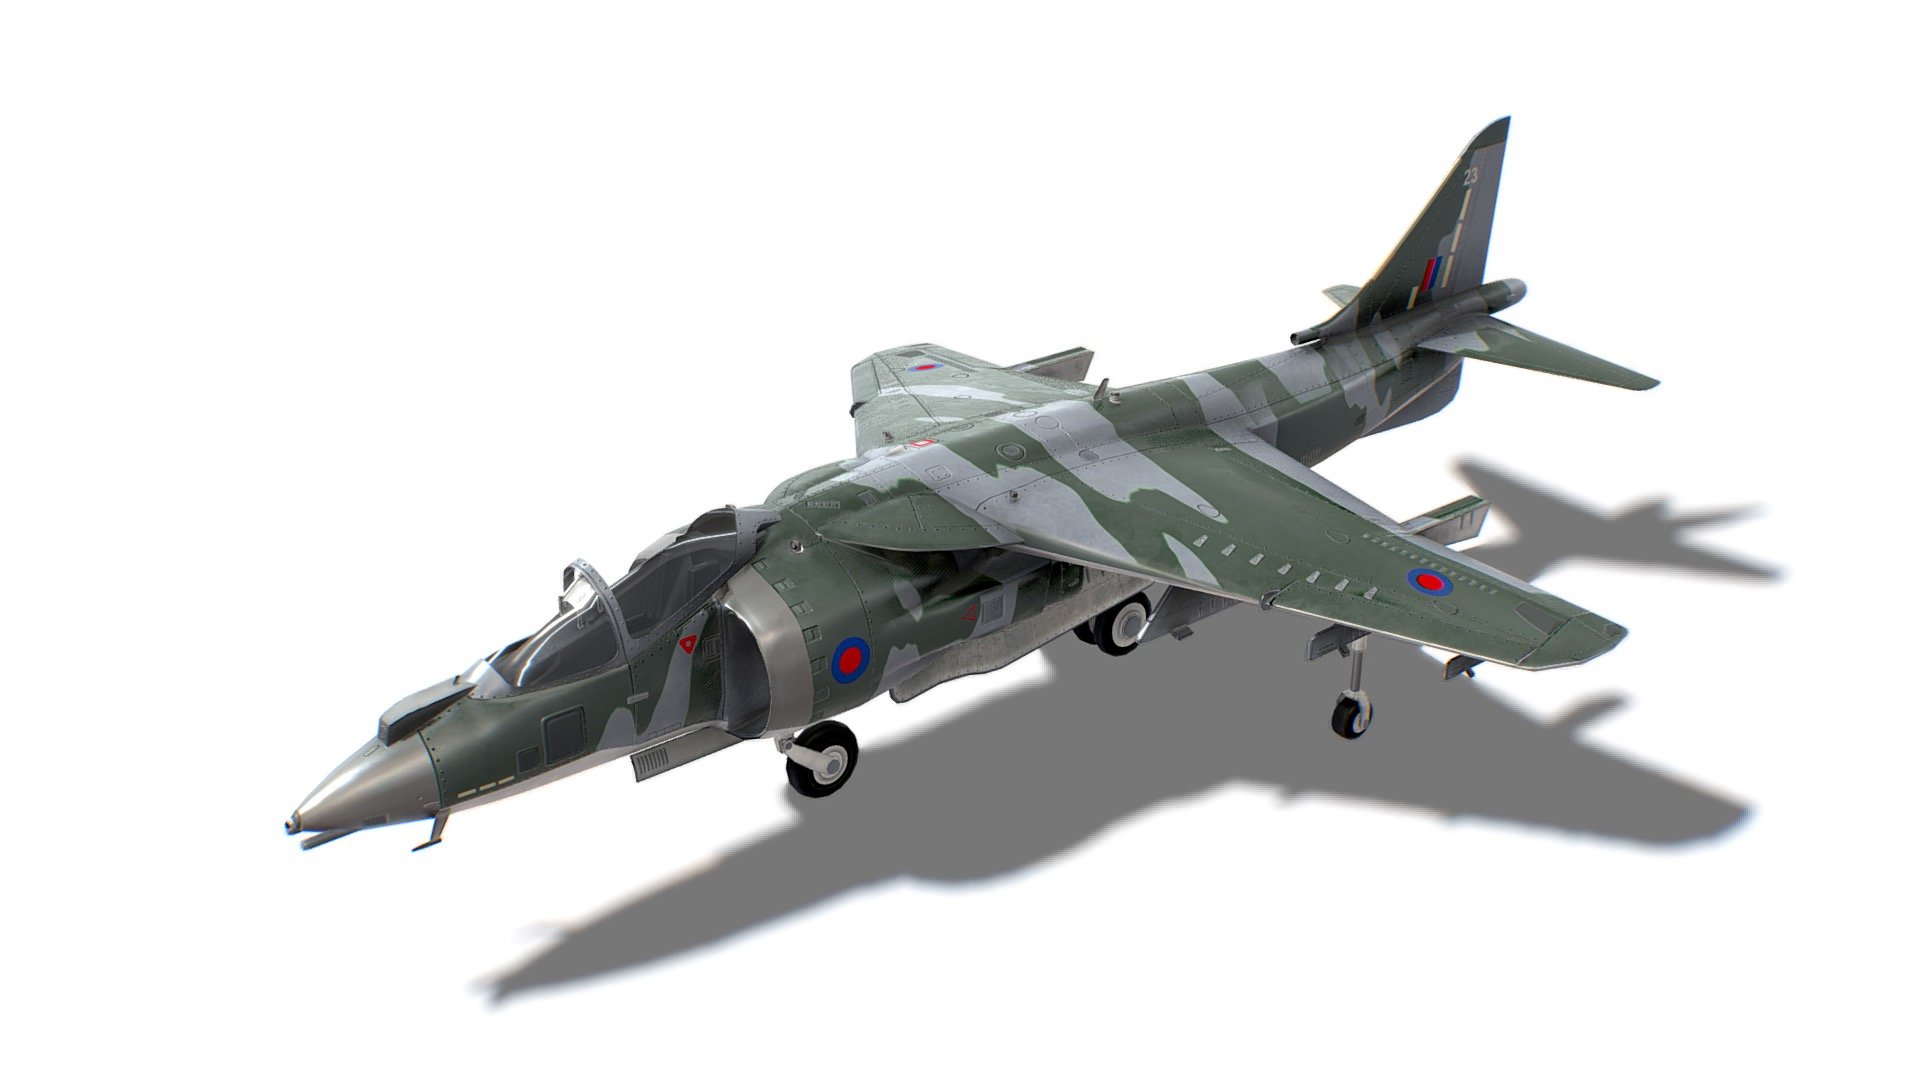 The model looks like a Harrier II. All parts of the model were made in full accordance with the original. Each dynamical part is separated and has correct pivot points, that allow easy animation and use in games. 

Advanced information:
- single material for whole mesh;
- set of 4K PBR textures;
- set of 4K Unreal PBR textures;
- set of 4K Unity PBR textures;
- set of 4K CryEngine PBR textures;
- FBX, DAE, ABC, OBJ and X3D file formats;
- 4 level of details;

Mesh details:
LOD0 - 10951
LOD1 - 5474
LOD2 - 2737
LOD3 - 300 - Harrier II Jet Fighter Aircraft - 3D model by FreakGames 3d model